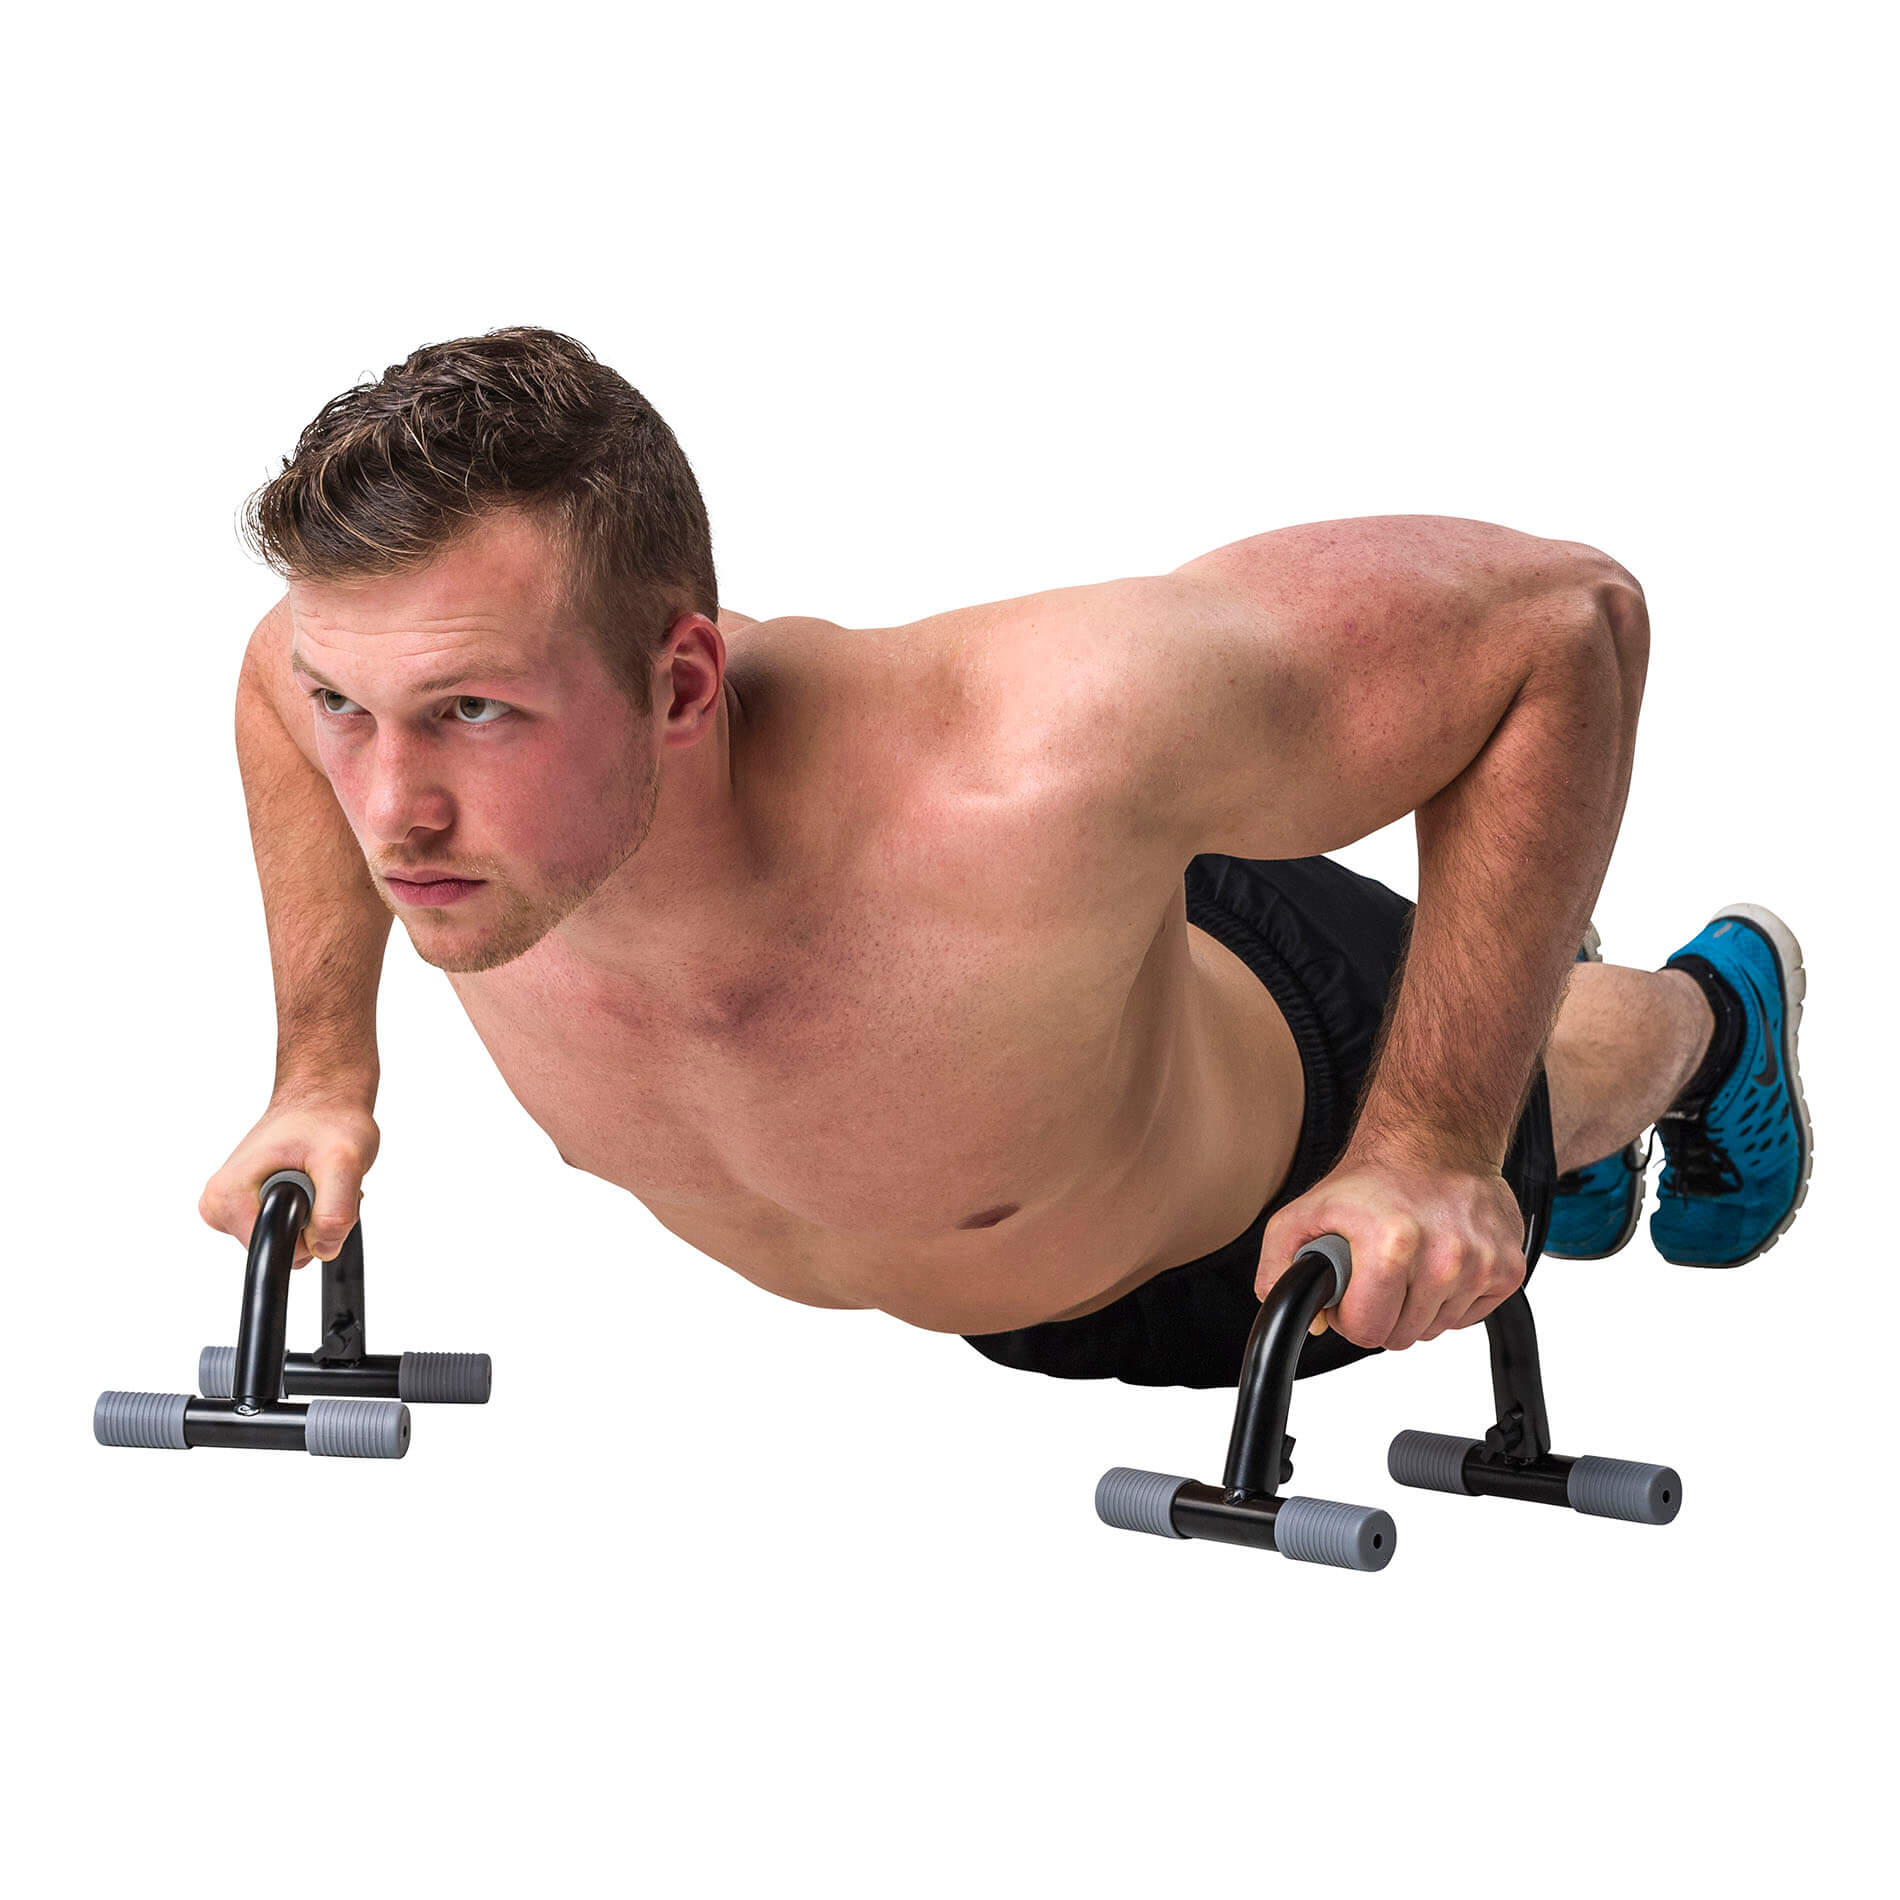 5BILLION XL Push Up Stands Parallettes Dip Bars With Non-Slip Foam ...